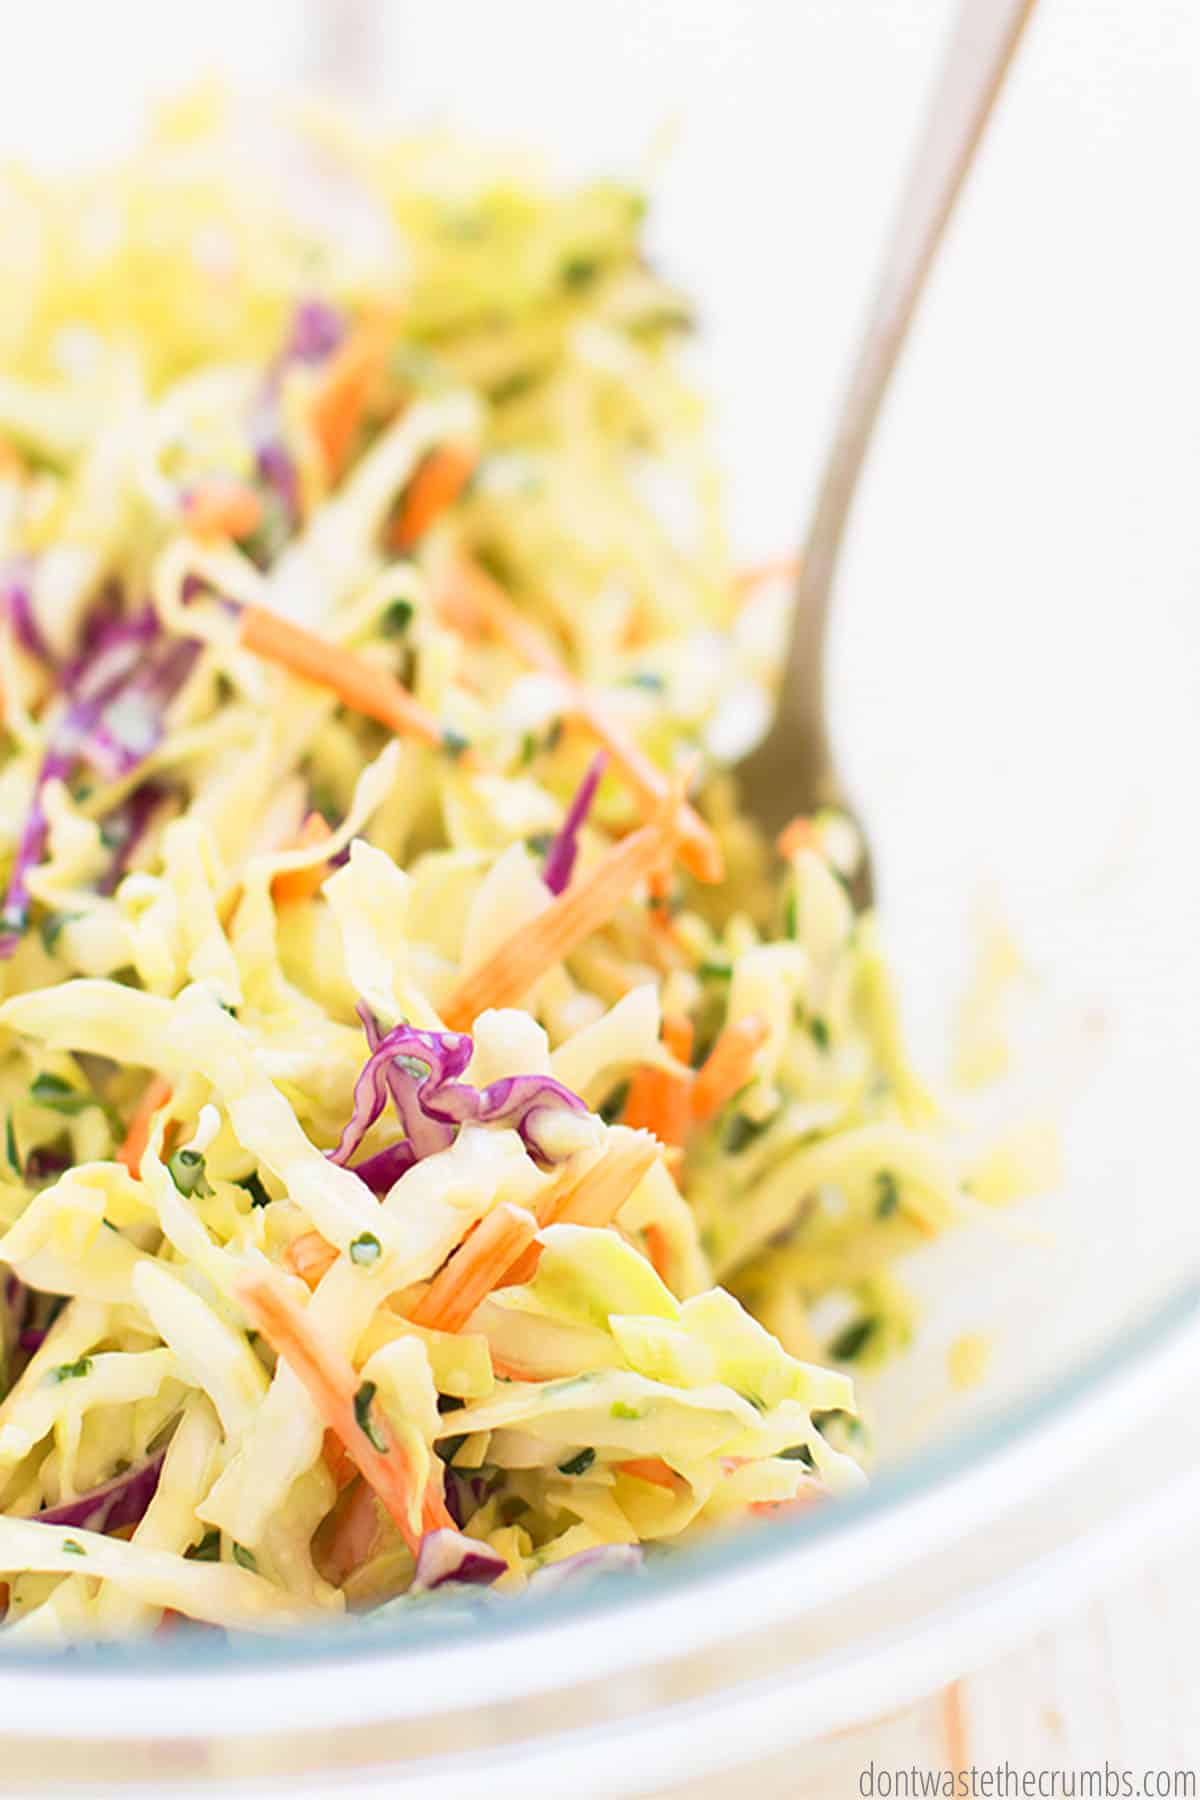 Cilantro lime coleslaw fills a clear bowl. Green cabbage is punctuated by slices of red cabbage, shredded carrots, and pieces of green onion and cilantro.